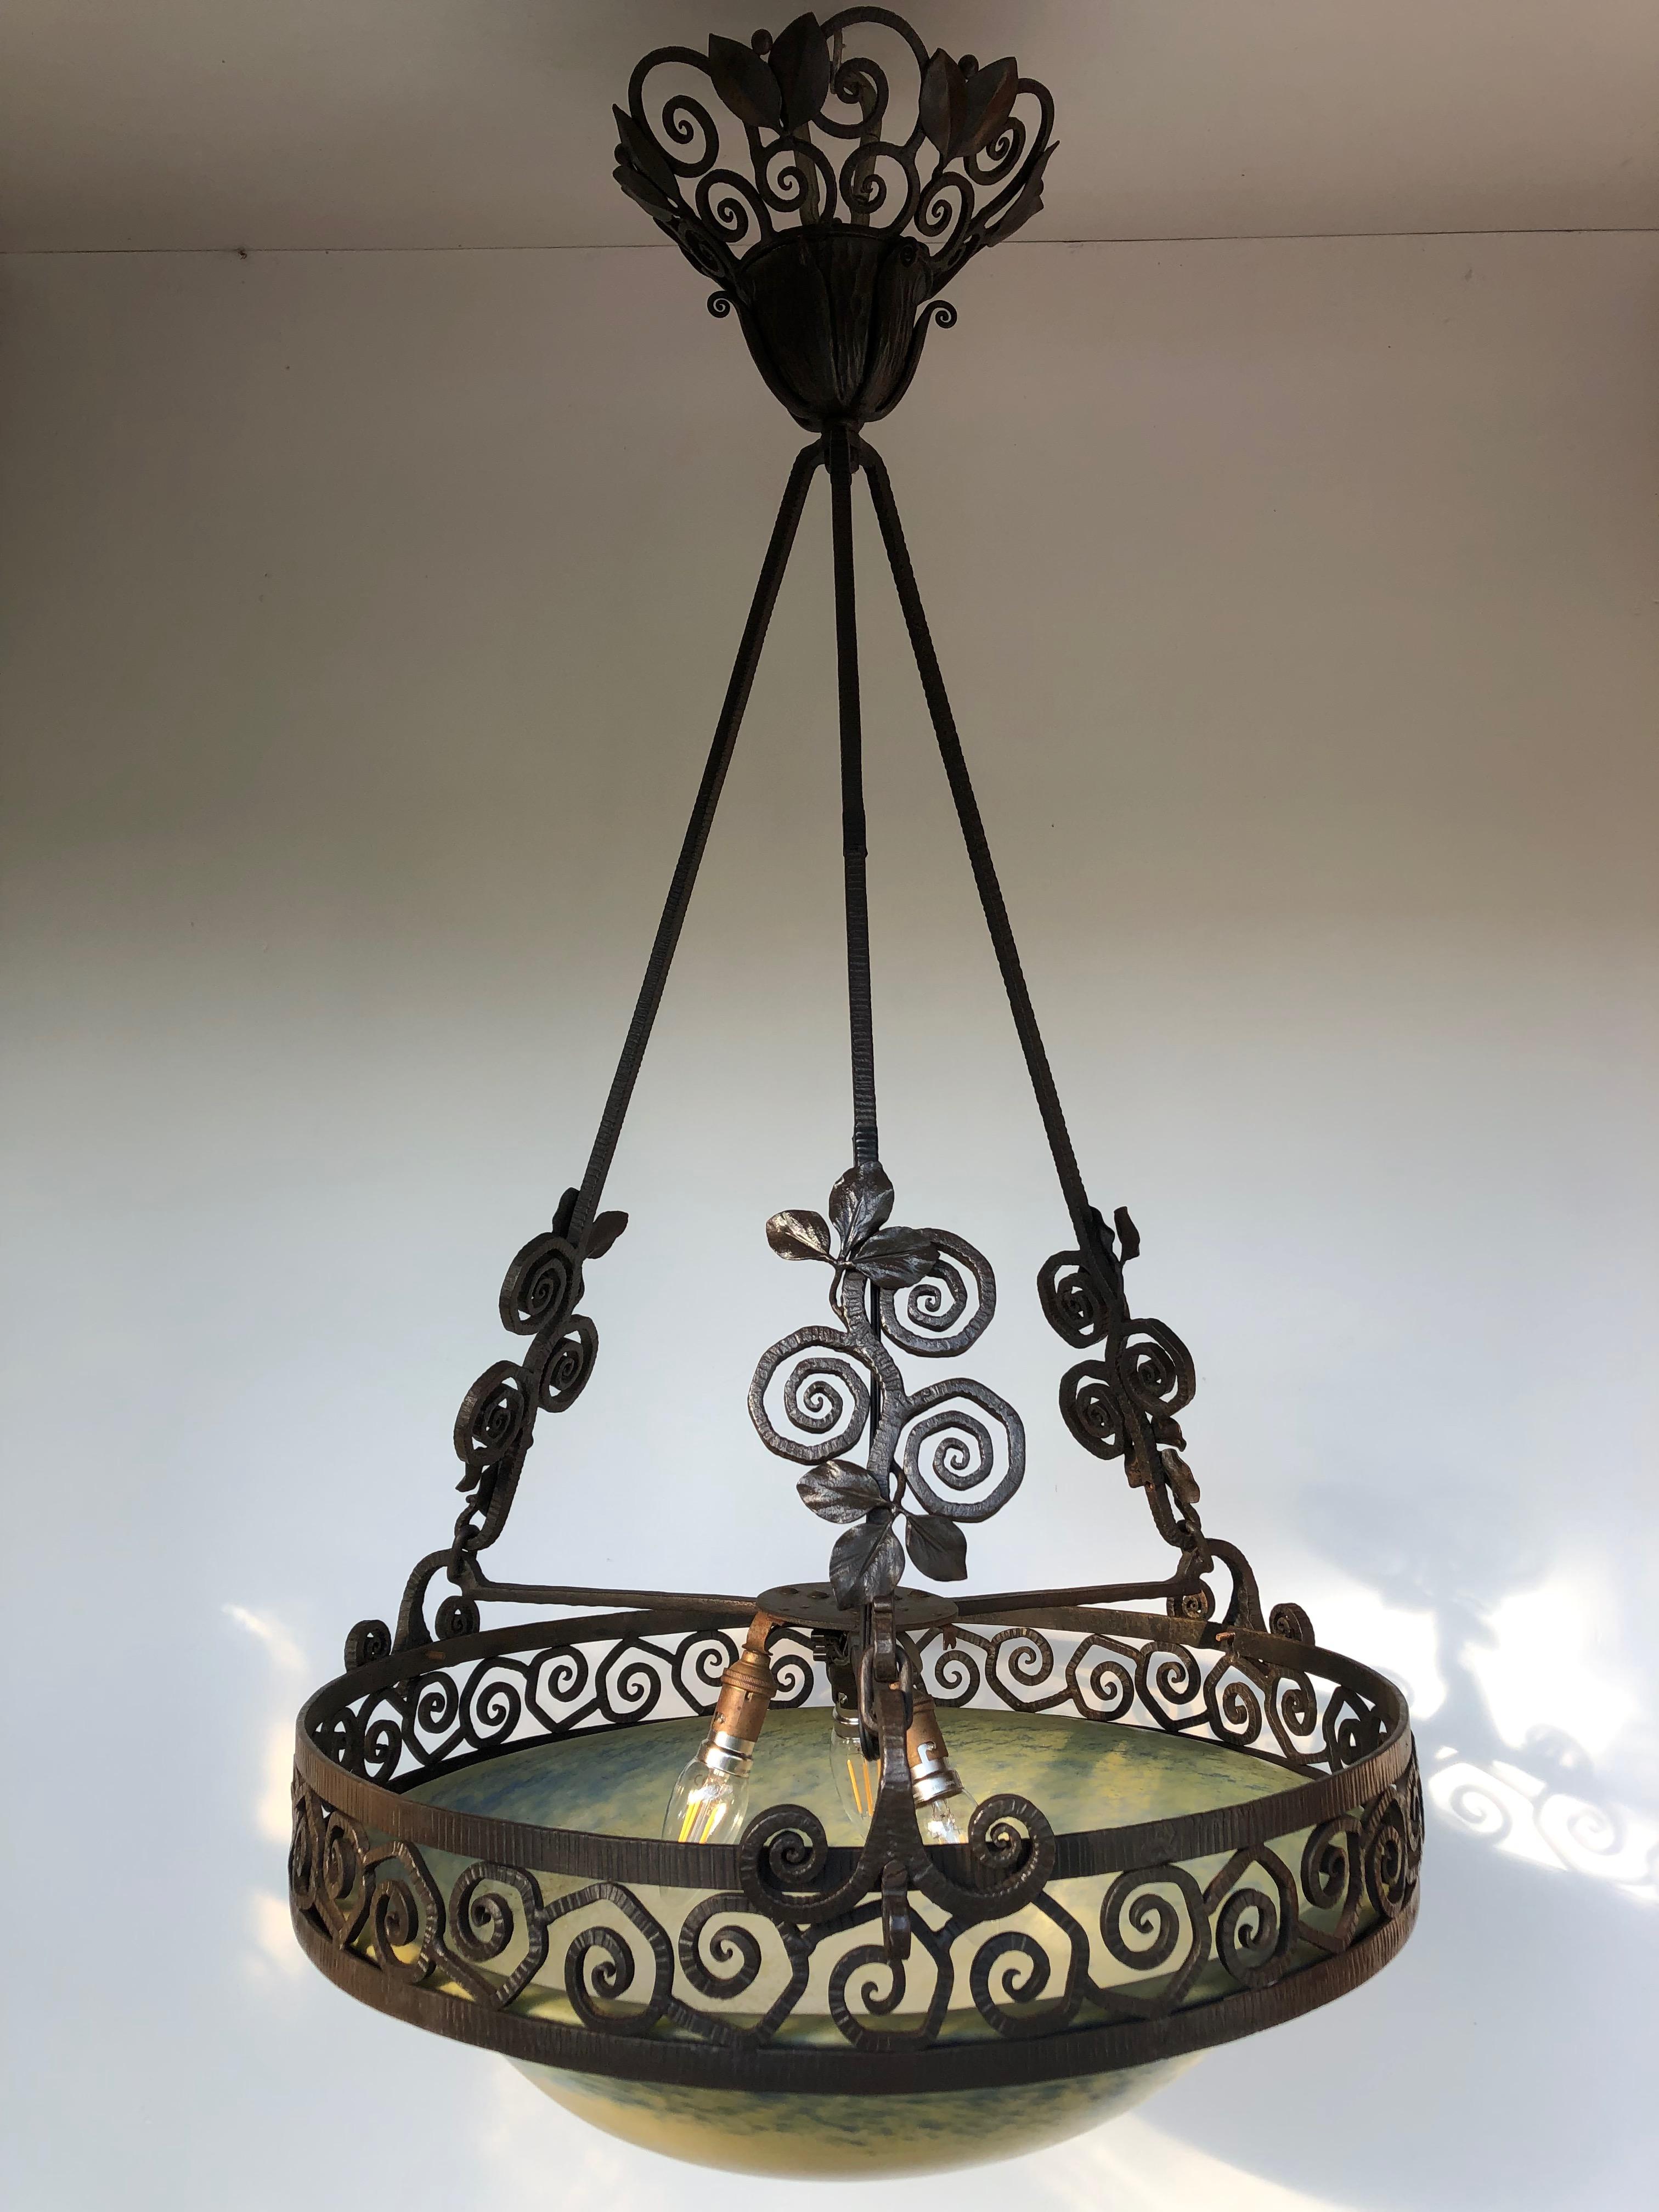 Edgar Brandt and Daum Nancy Art Deco chandelier.

Art deco chandelier circa 1925 in wrought iron decorated with leaves and windings. Frame stamped E. Brandt.
Coupe in blue and cream glass paste signed Daum Nancy.
In perfect condition and